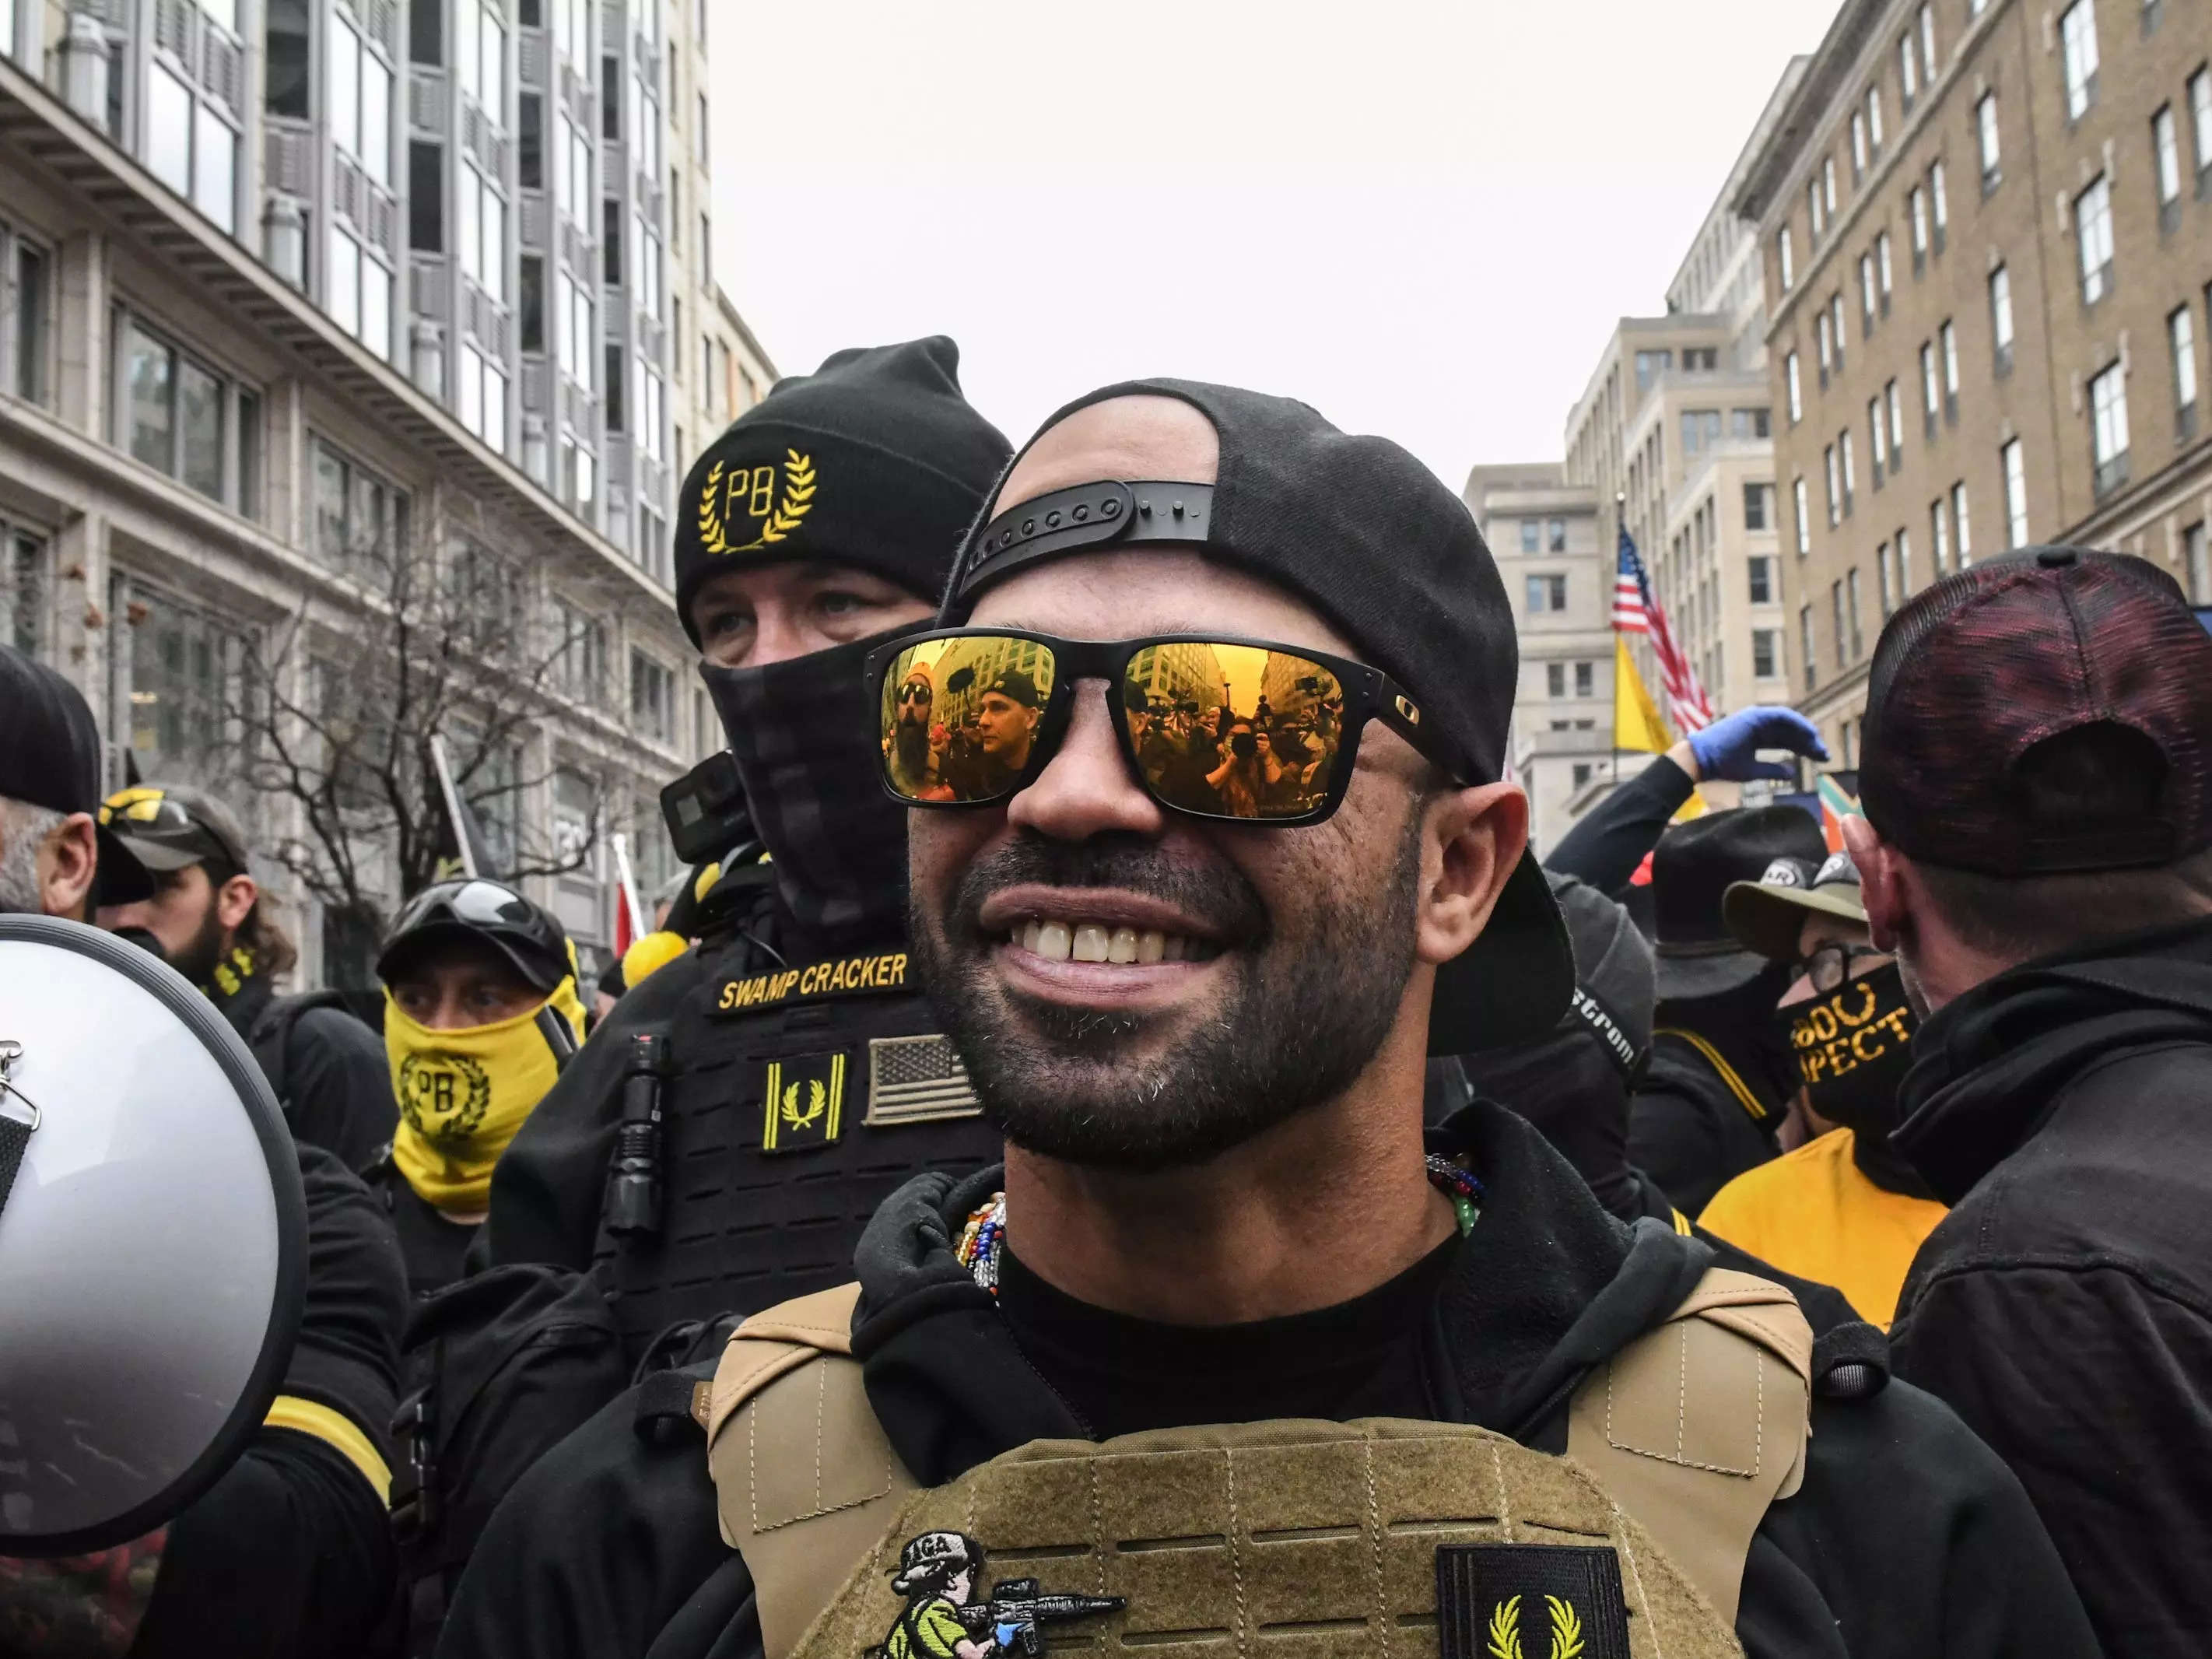 
Ex-Proud Boys leader Enrique Tarrio doesn't think he'll get a fair trial in DC
